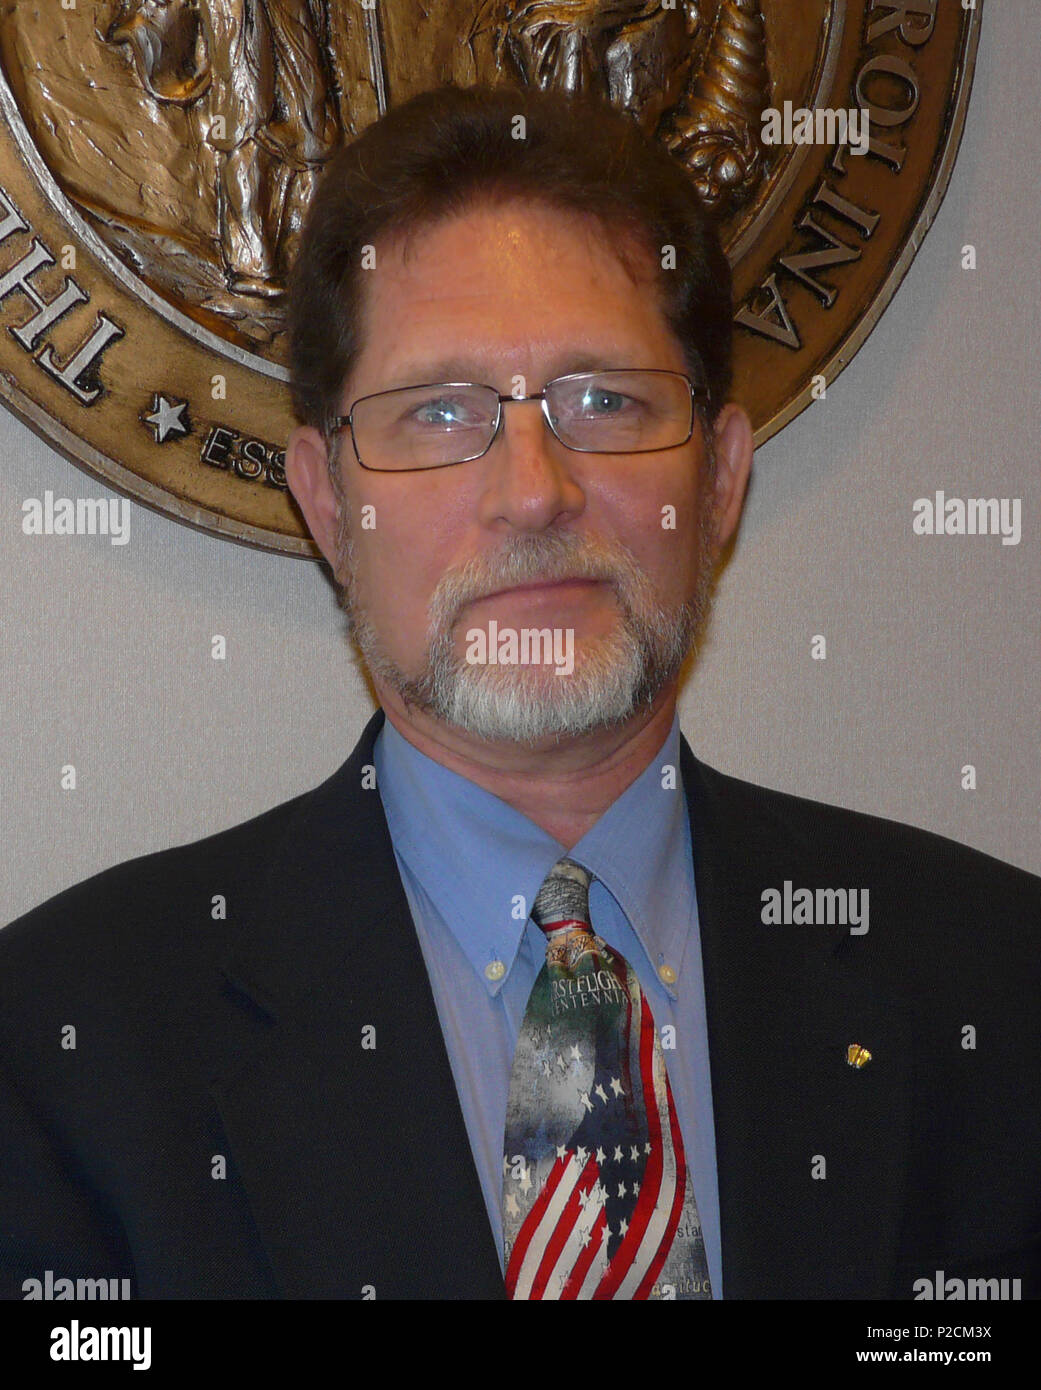 . English: This is the profile photo on the N.C. General Assembly website for the 2011-2012 legislative session. 13 October 2010. State of North Carolina 30 Larry G Pittman NCGA 2012 Stock Photo